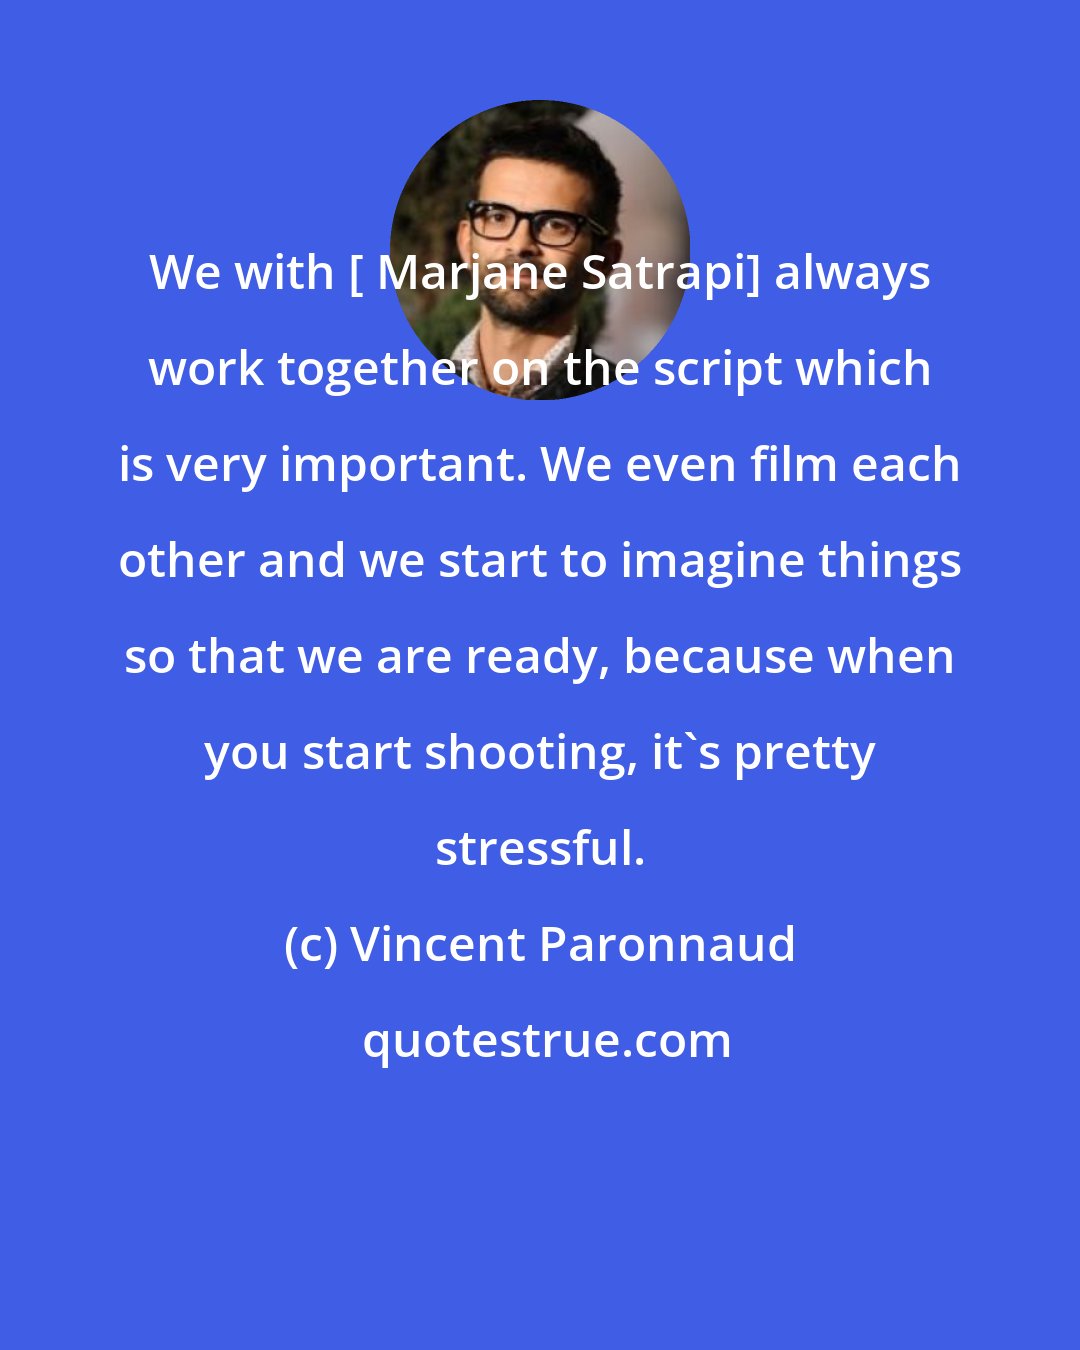 Vincent Paronnaud: We with [ Marjane Satrapi] always work together on the script which is very important. We even film each other and we start to imagine things so that we are ready, because when you start shooting, it's pretty stressful.